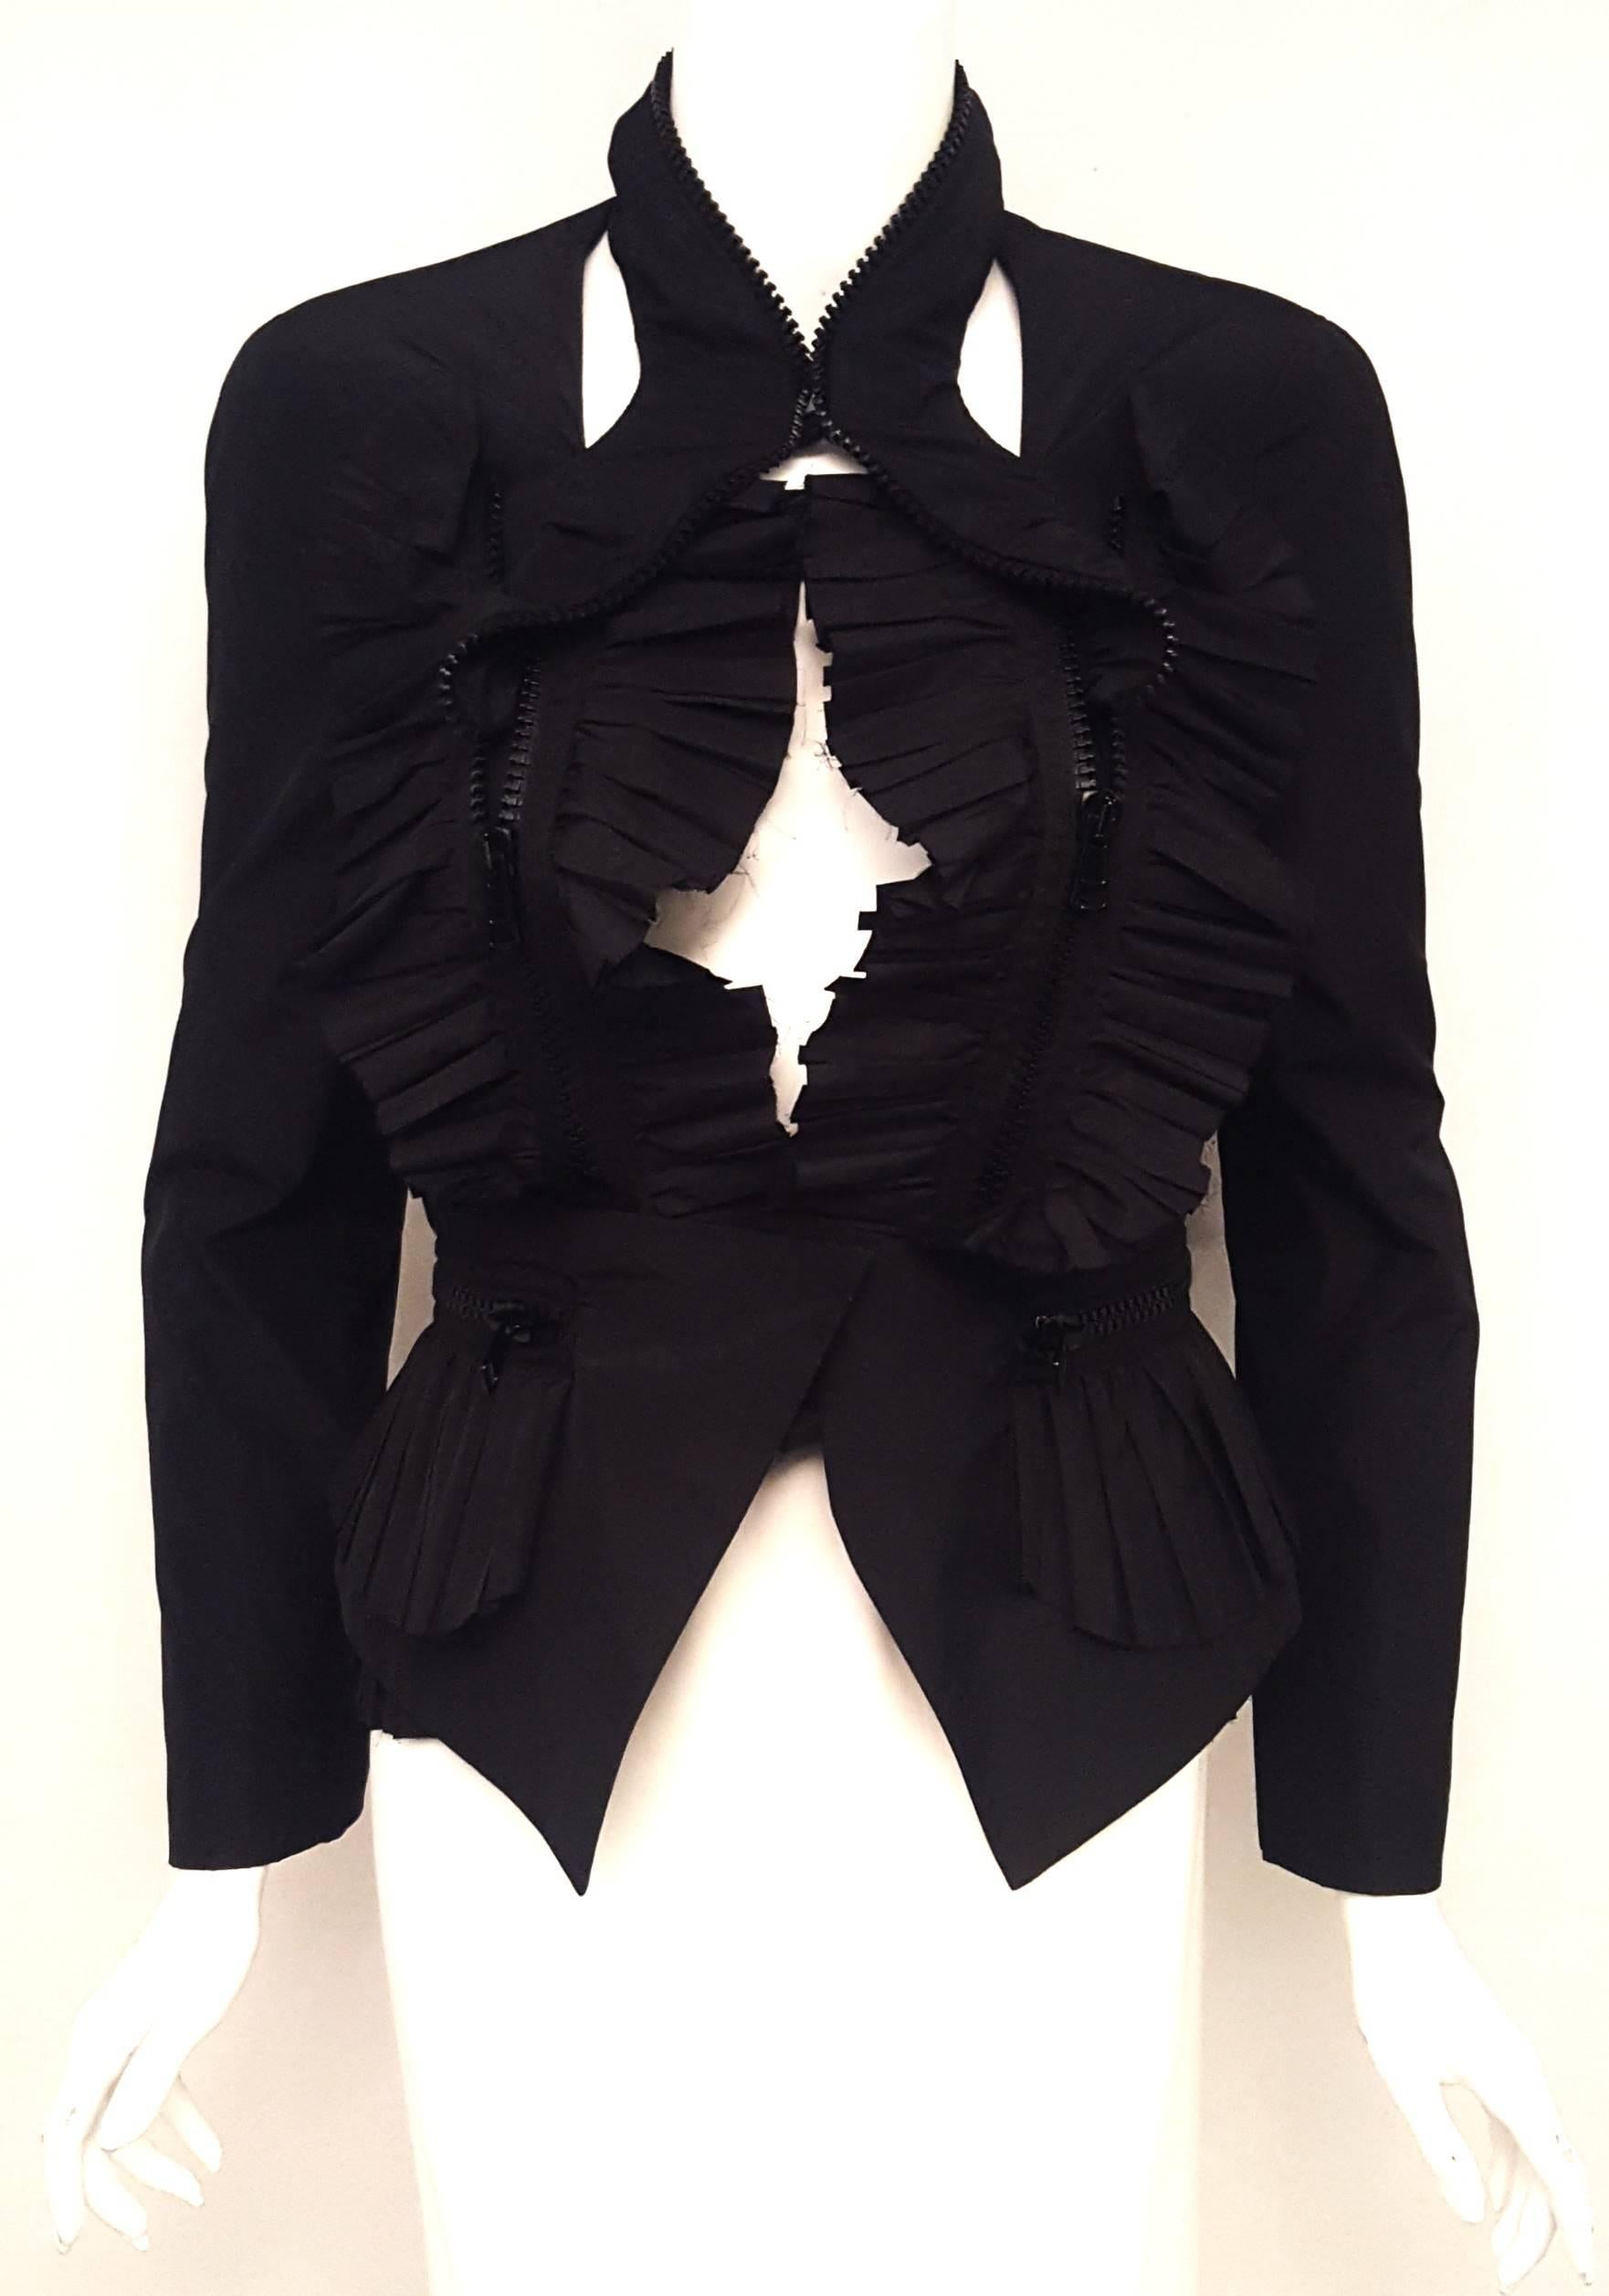 Givenchy black pleated jacket with multi zippers throughout the garment that transform this top from classic to trendy!  Sure to please the discerning fashionistas!